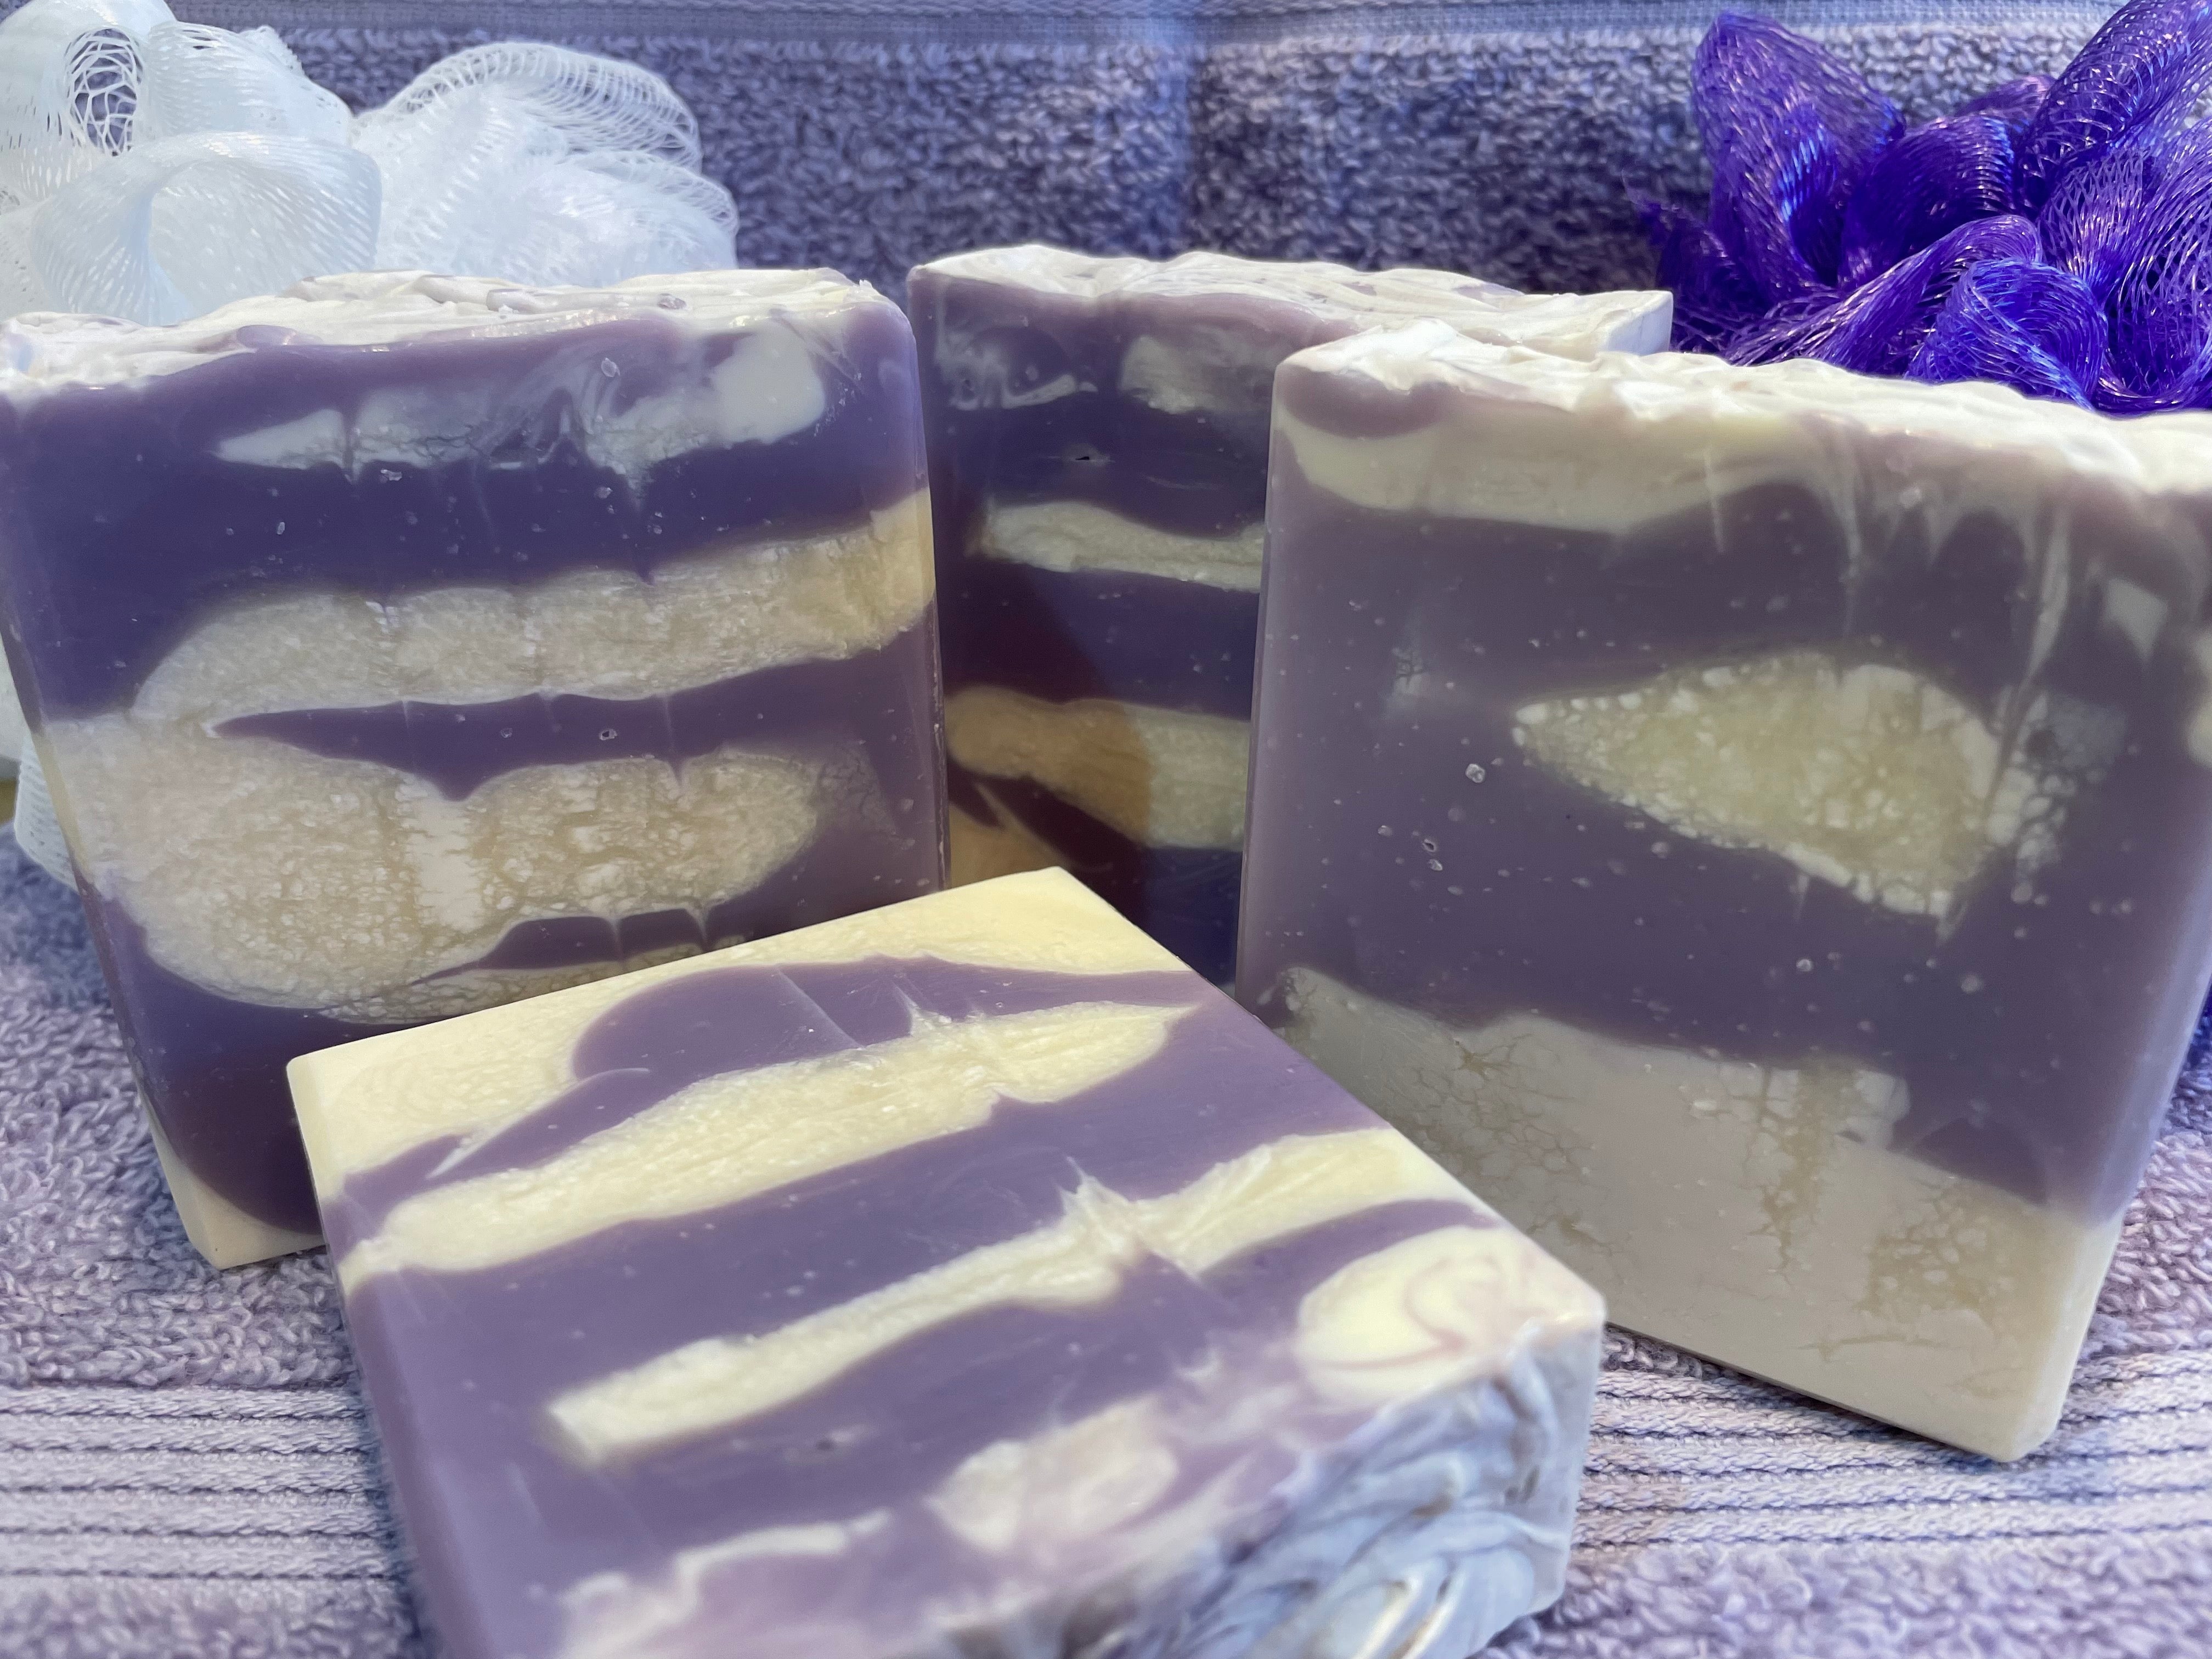 360Feel Floral 4 large Soap bar - Flower scents Lavender, Lilac, Hydrangea  - Anniversary Wedding Gift Set - Handmade Natural Organic with Essential